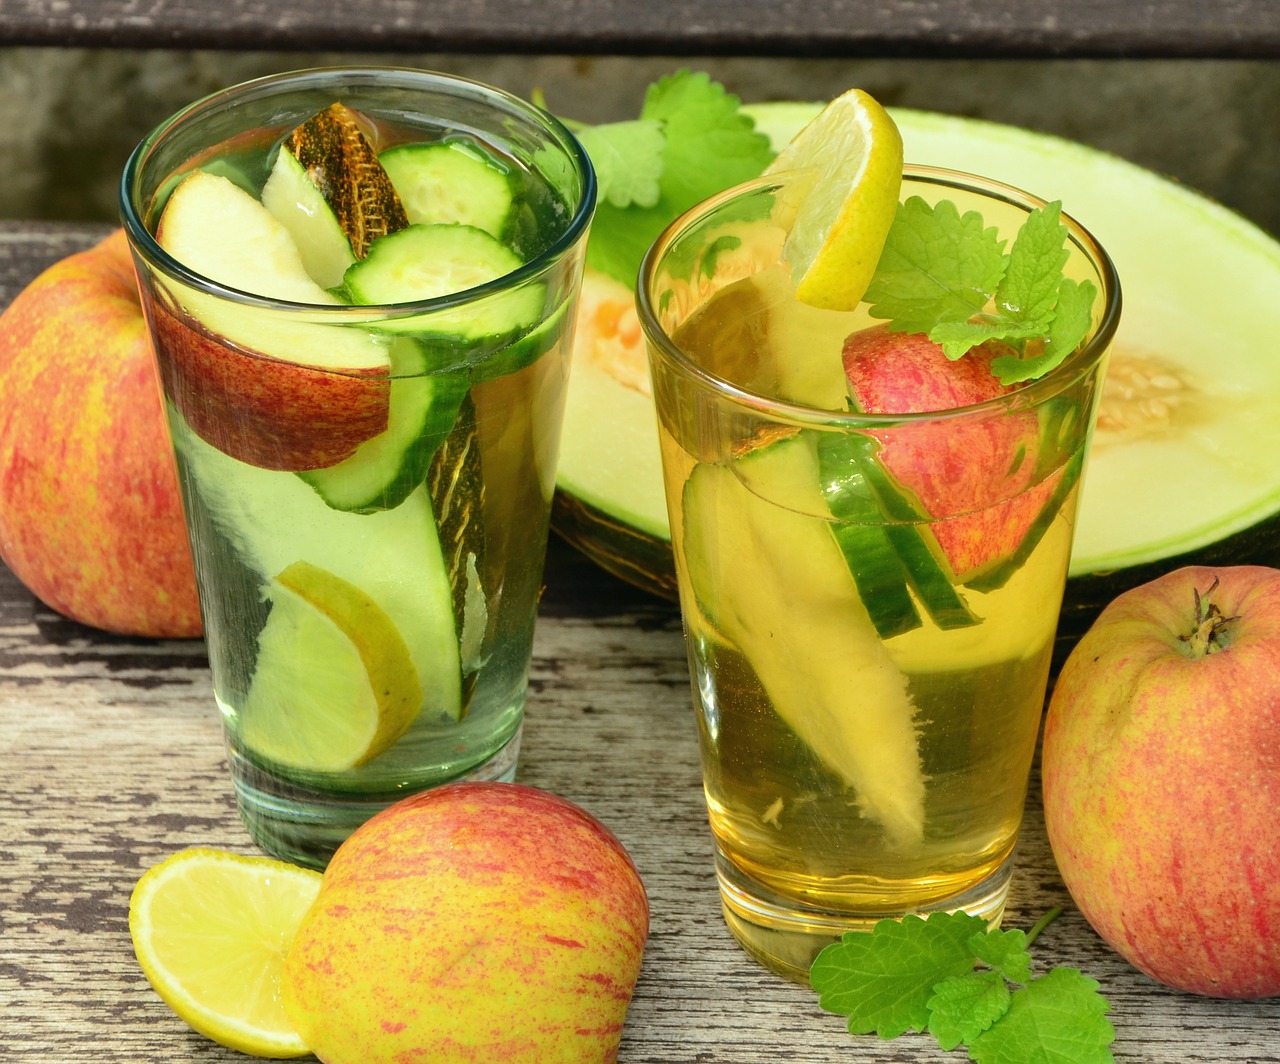 Can A Detox or Cleanse Help Your Liver?